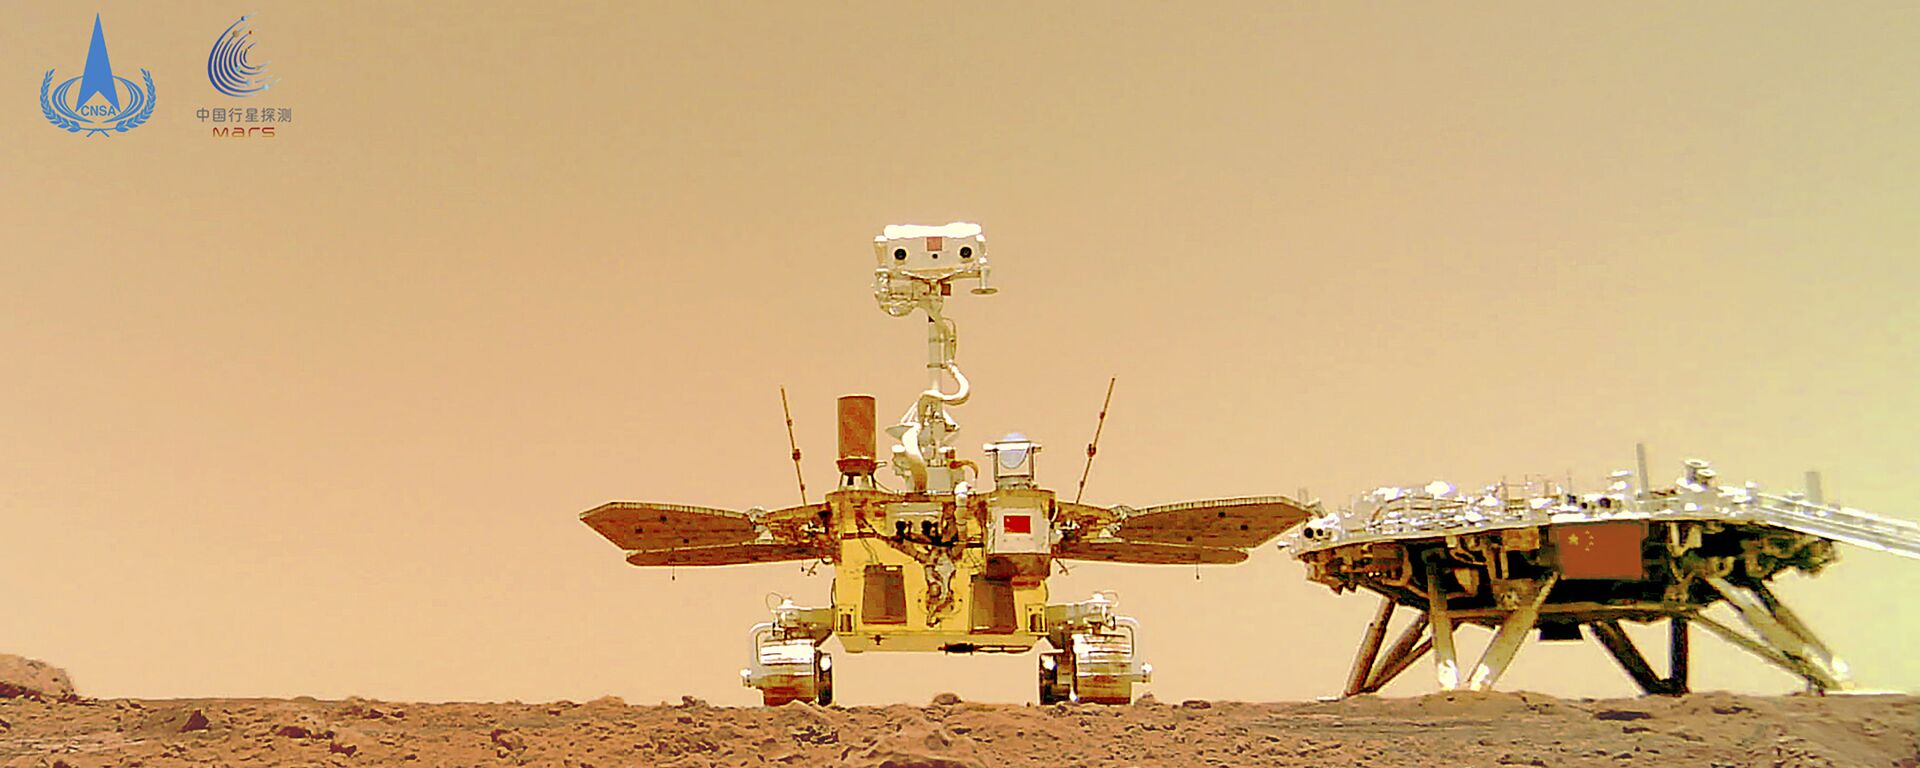 In this image released by the China National Space Administration (CNSA) on Friday, June 11, 2021, the Chinese Mars rover Zhurong is seen near its landing platform taken by a remote camera that was dropped into position by the rover. - Sputnik International, 1920, 29.01.2022